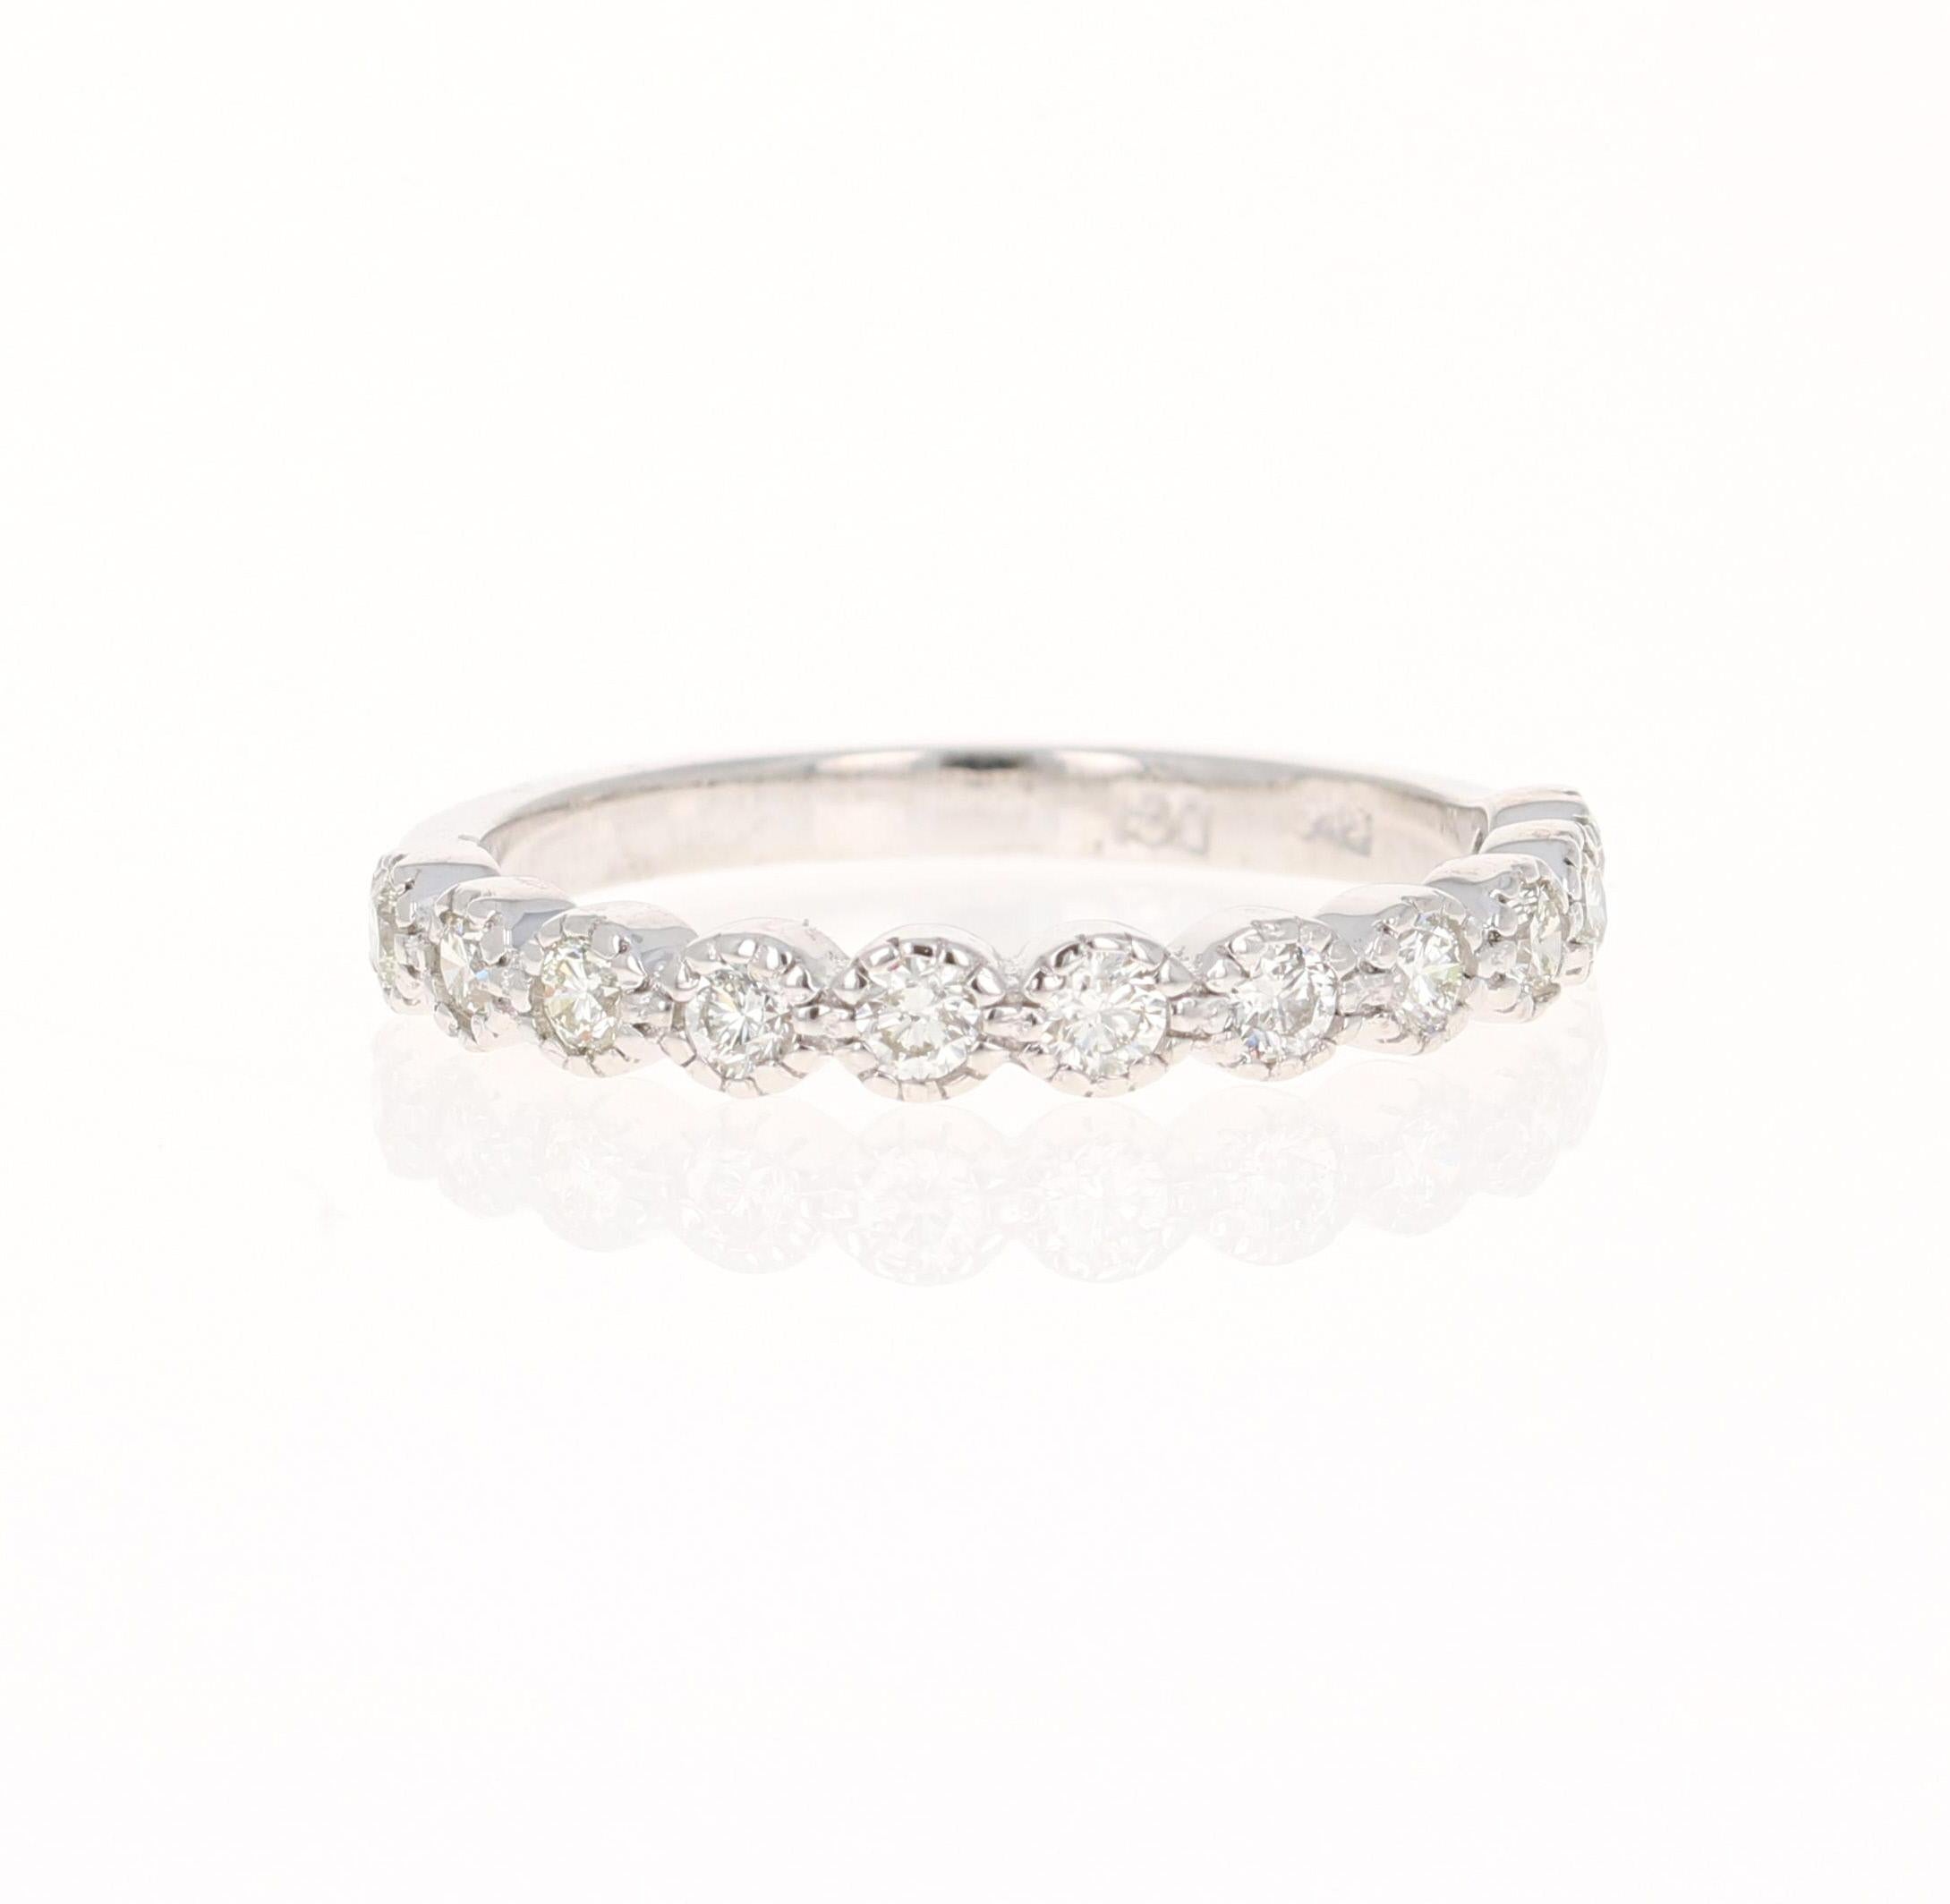 A beautiful band that can be worn as a single band or stack with other bands in other colors of Gold! 

This ring has 11 Round Cut Diamonds that weigh 0.44 Carats. The clarity and color of the diamonds are VS-H.

Crafted in 14 Karat White Gold and